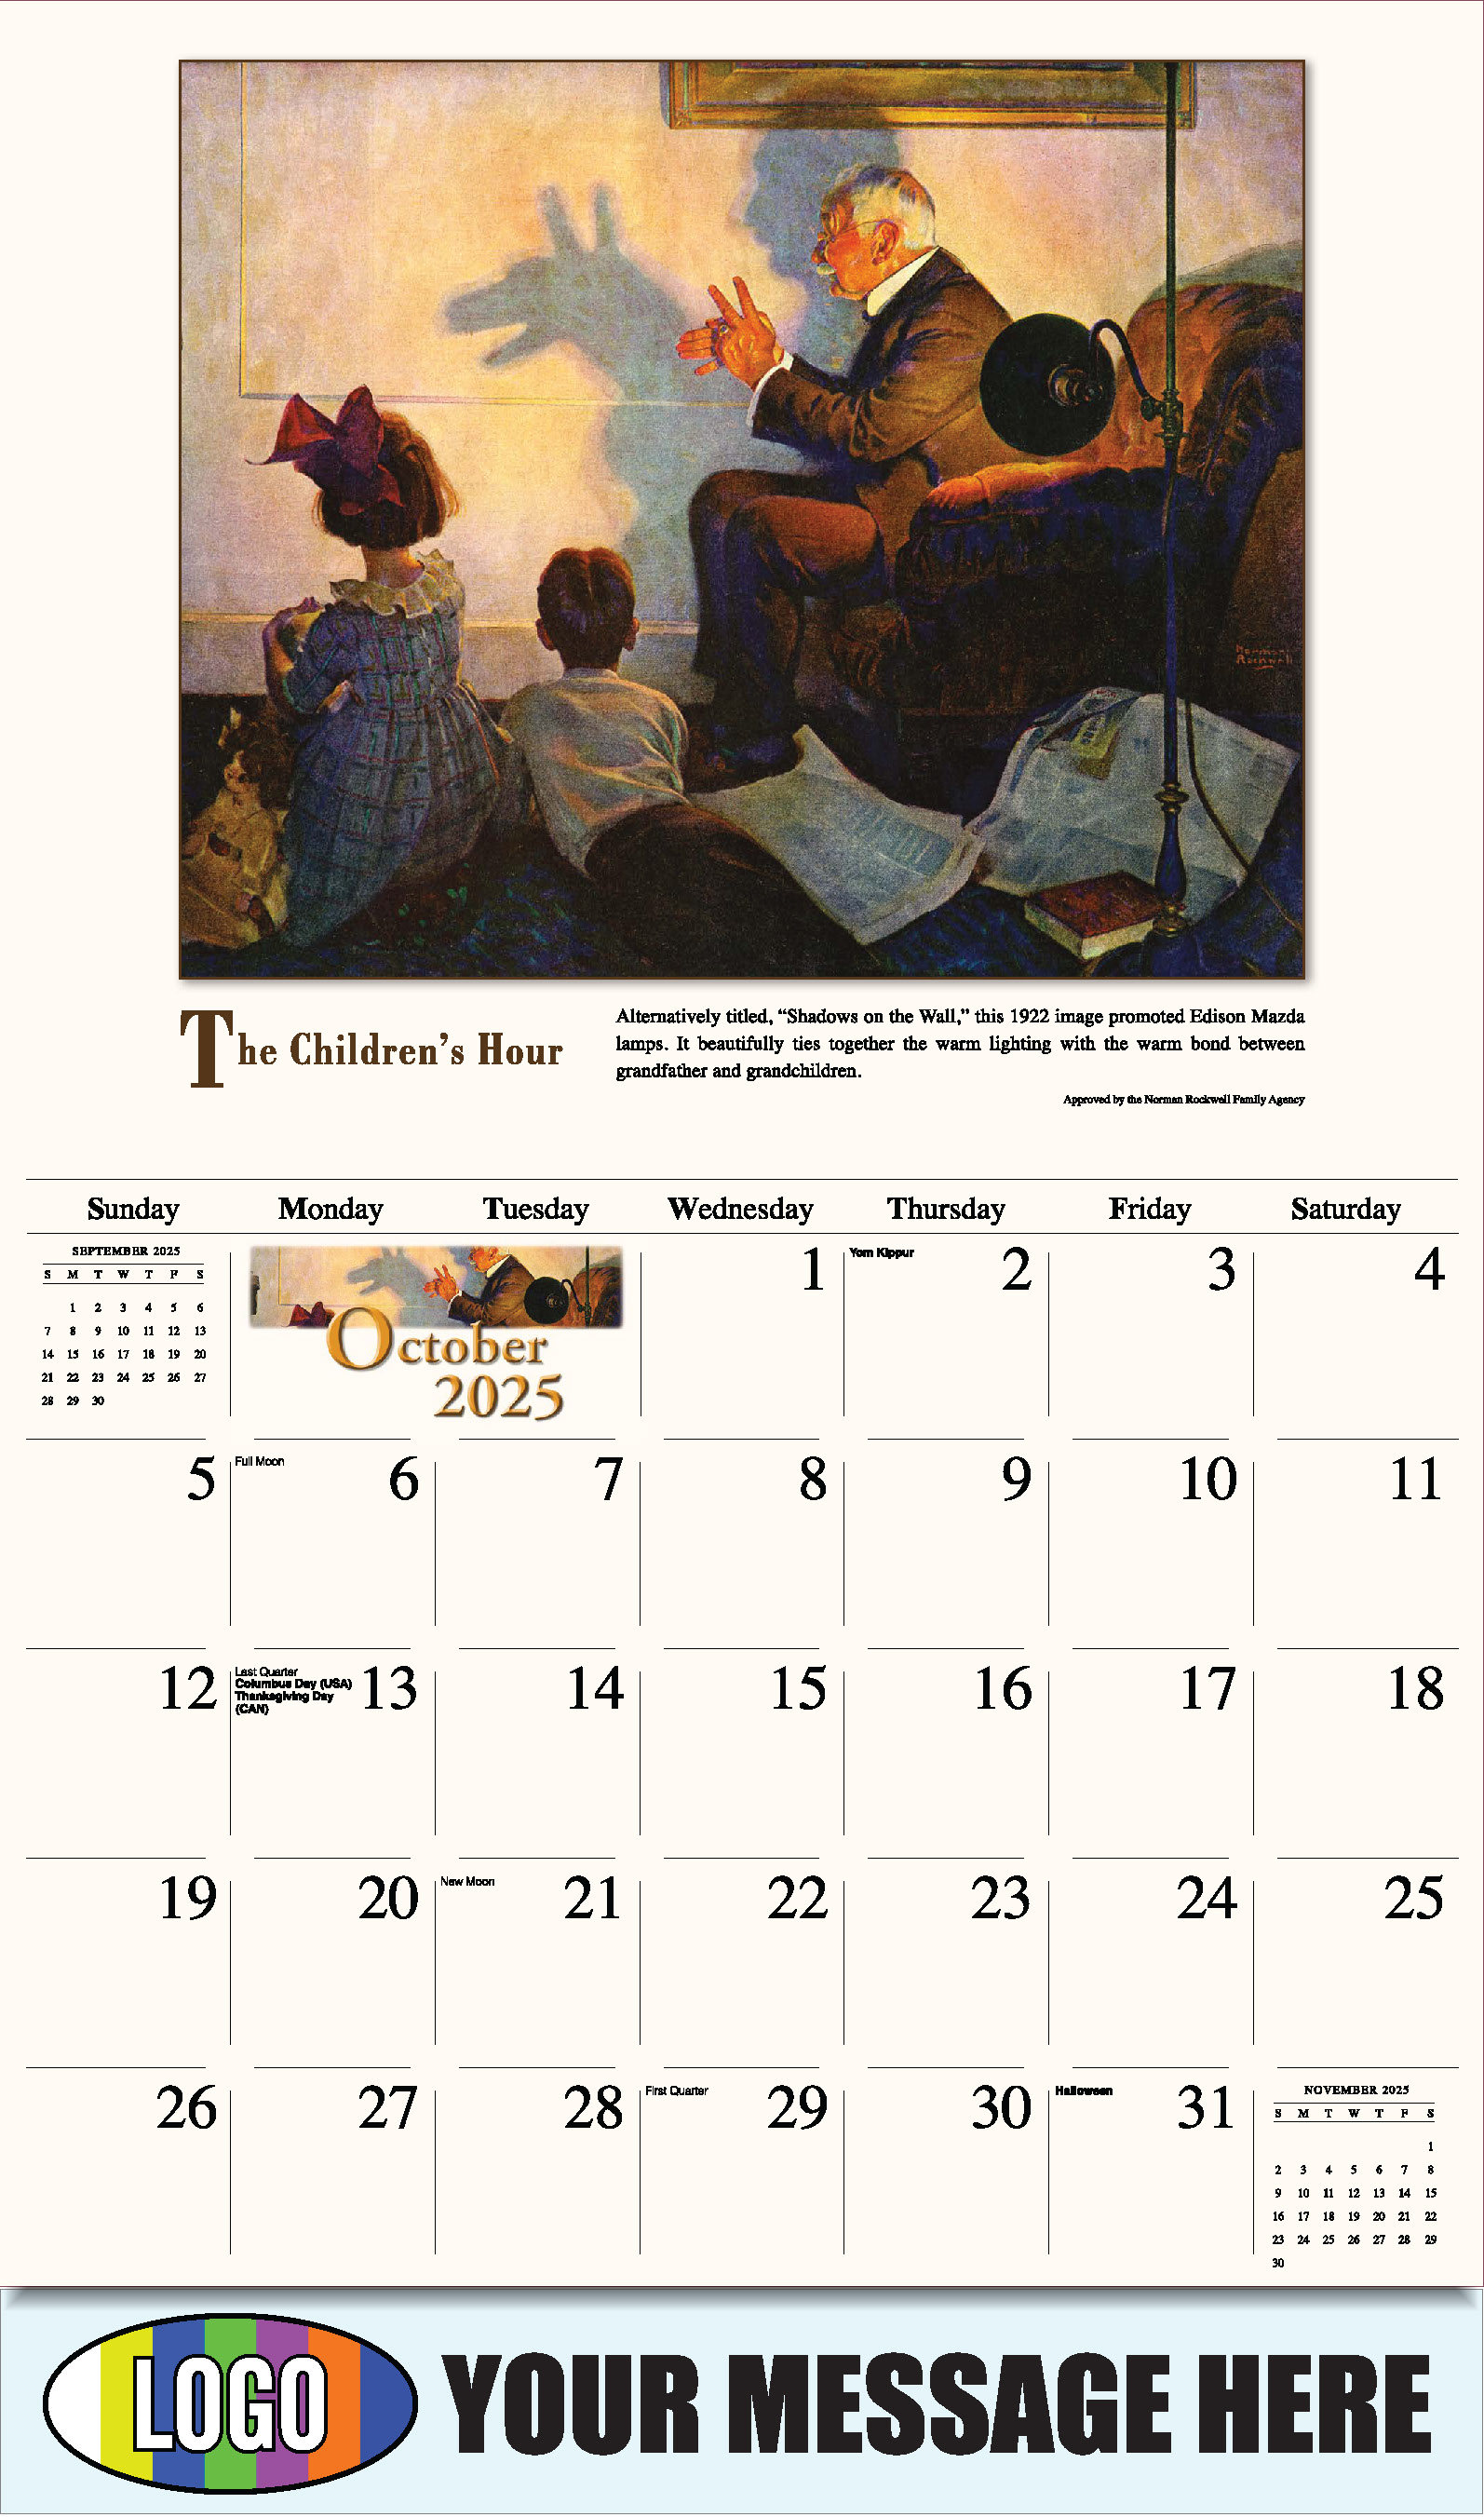 Memorable Images by Norman Rockwell 2025 Business Promotional Wall Calendar - October